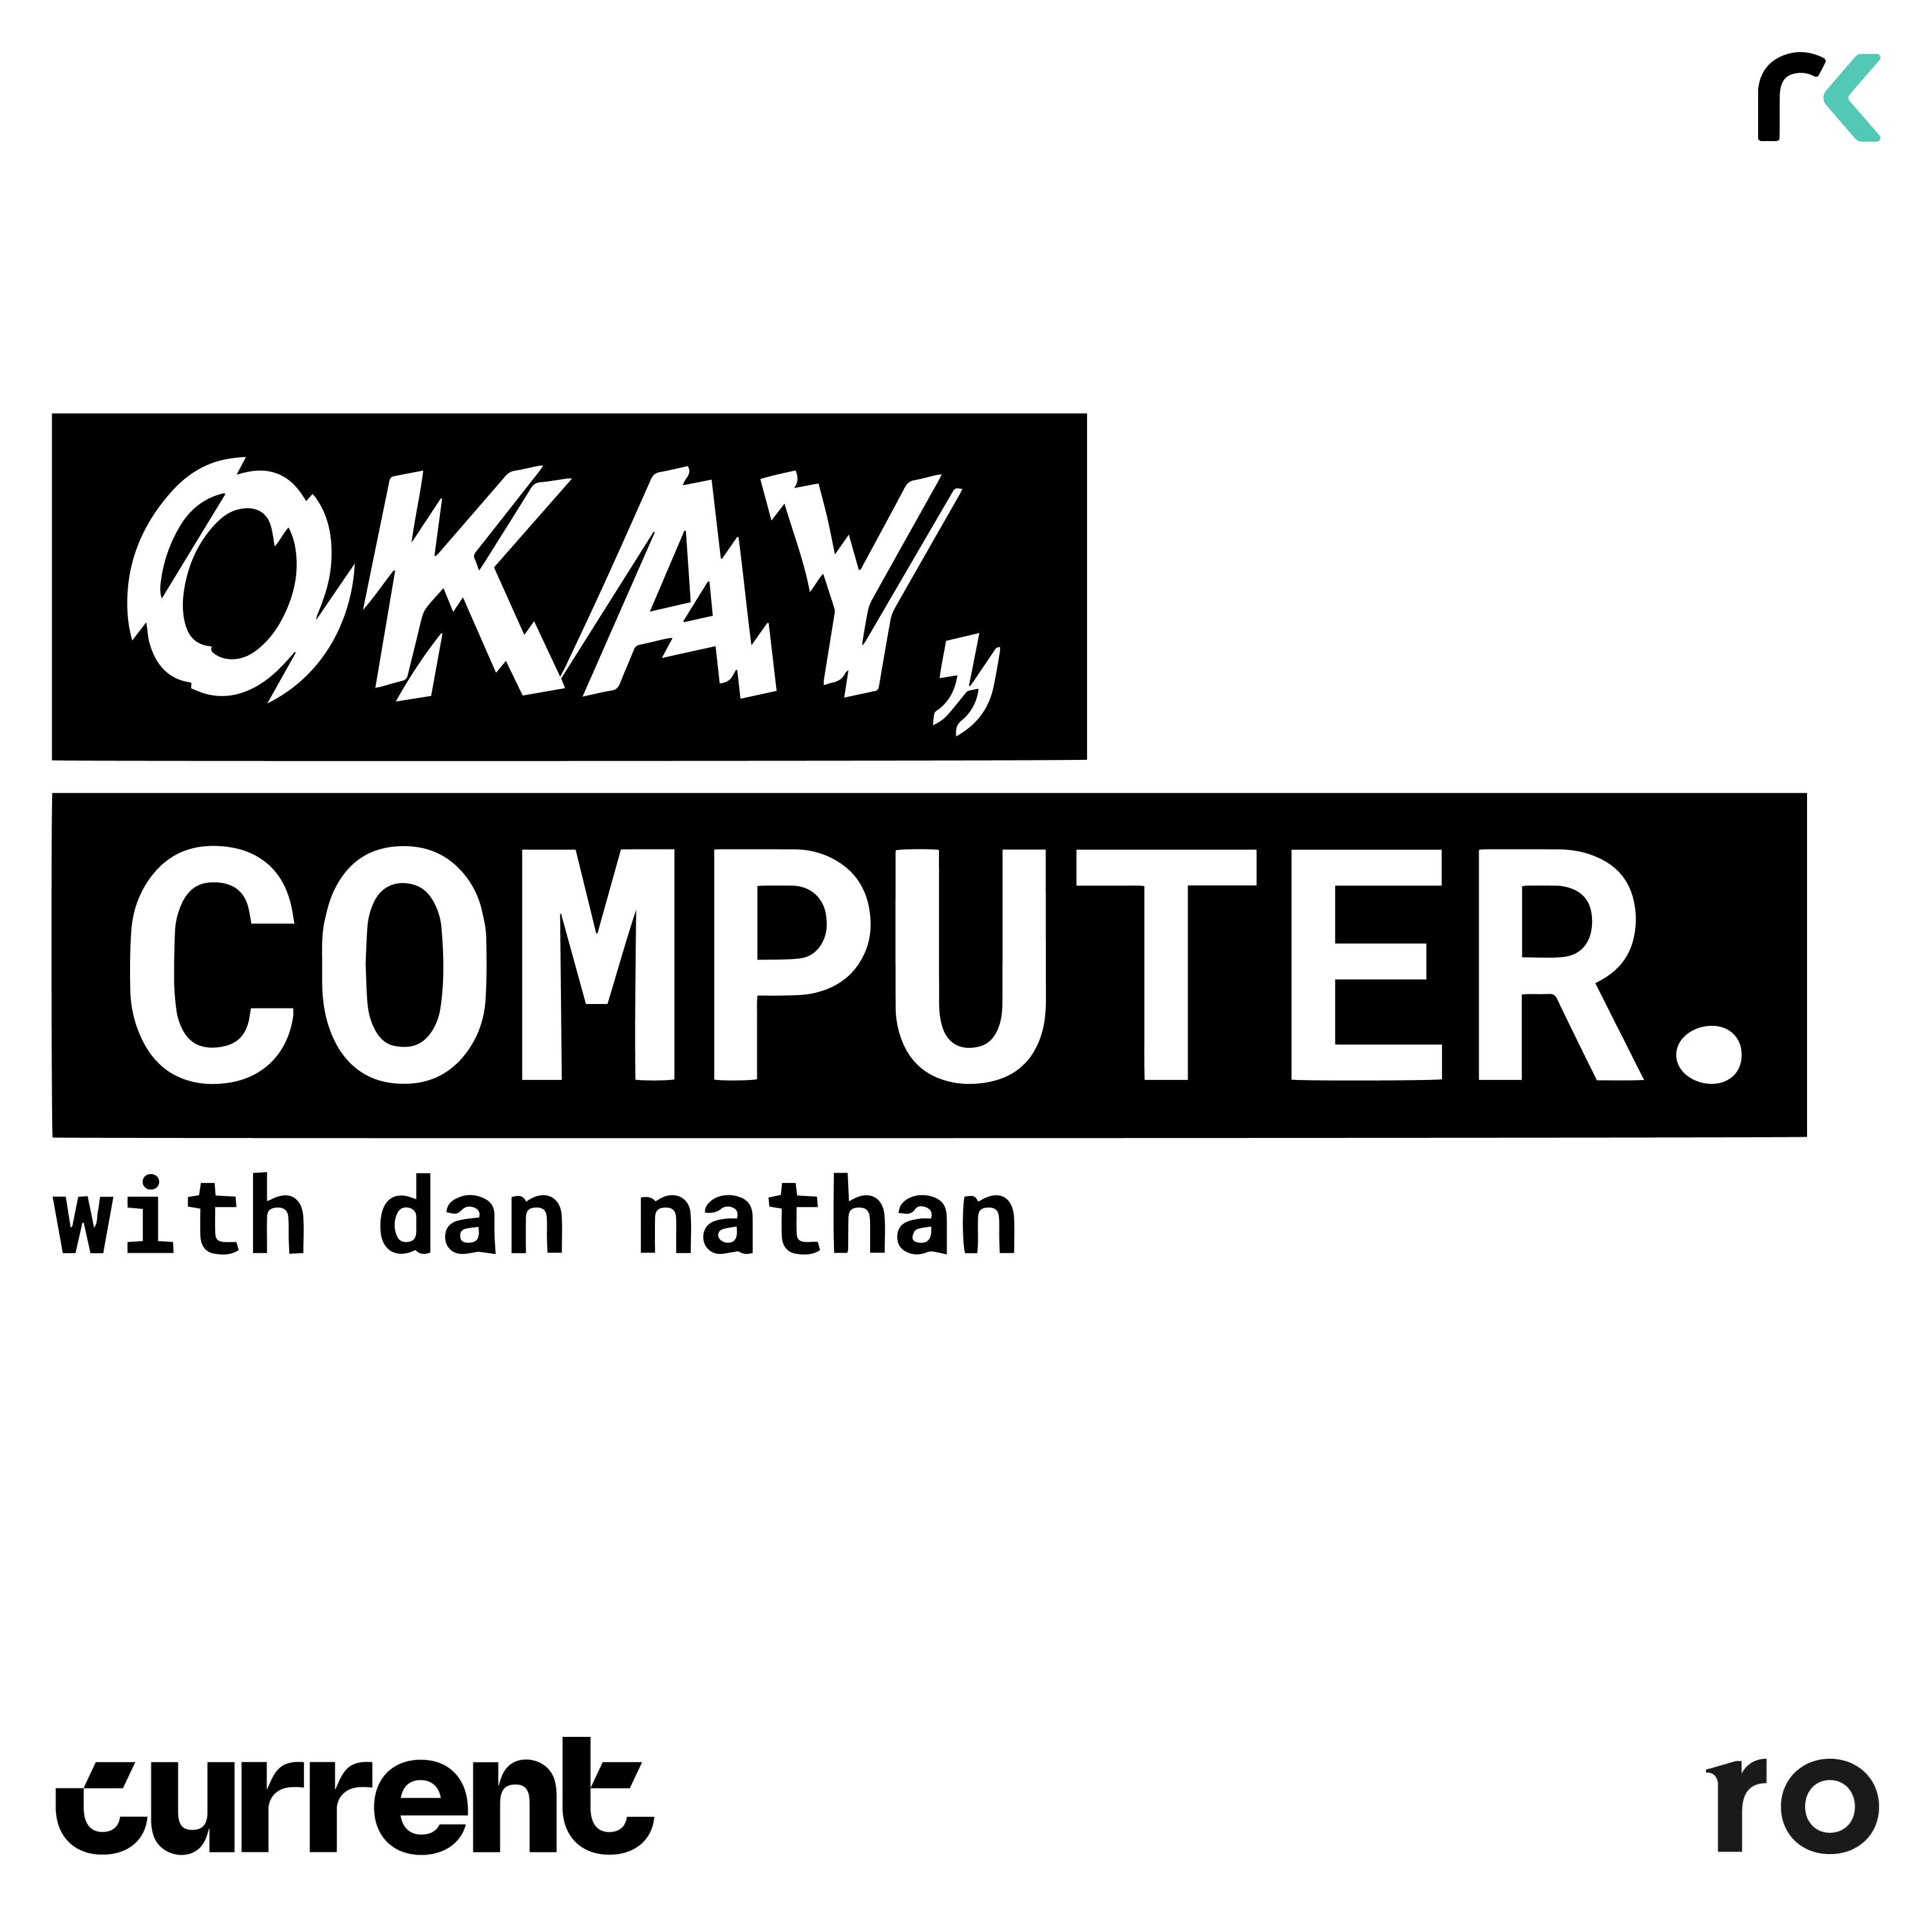 Everything Old is New Again with Deirdre Bosa  |  Okay, Computer.